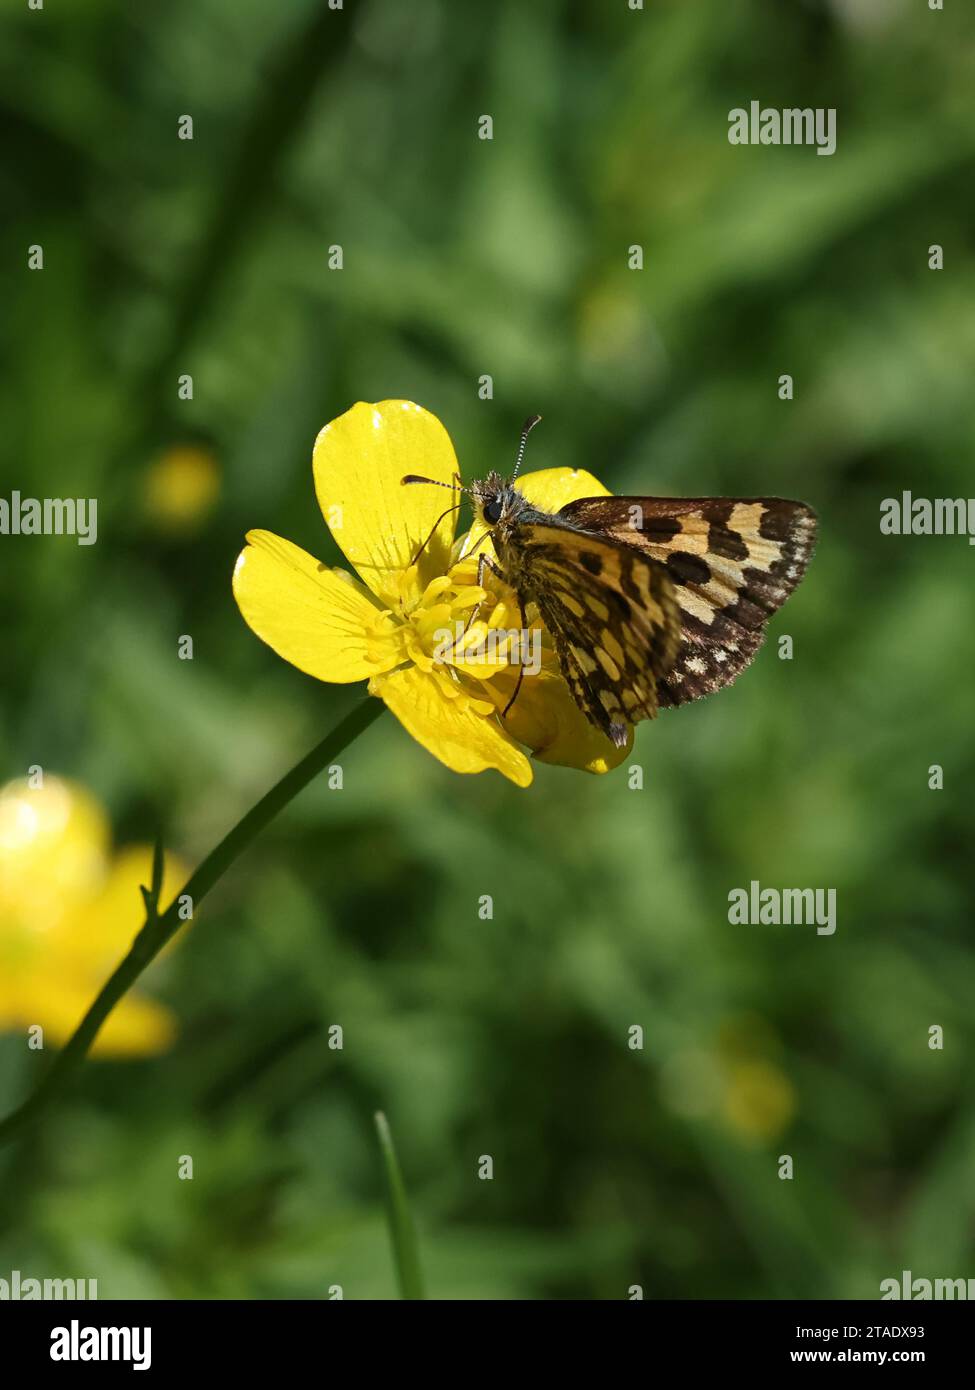 Northern Checquered Skipper, Carterocephalus silvicola, butterfly from Finland Stock Photo